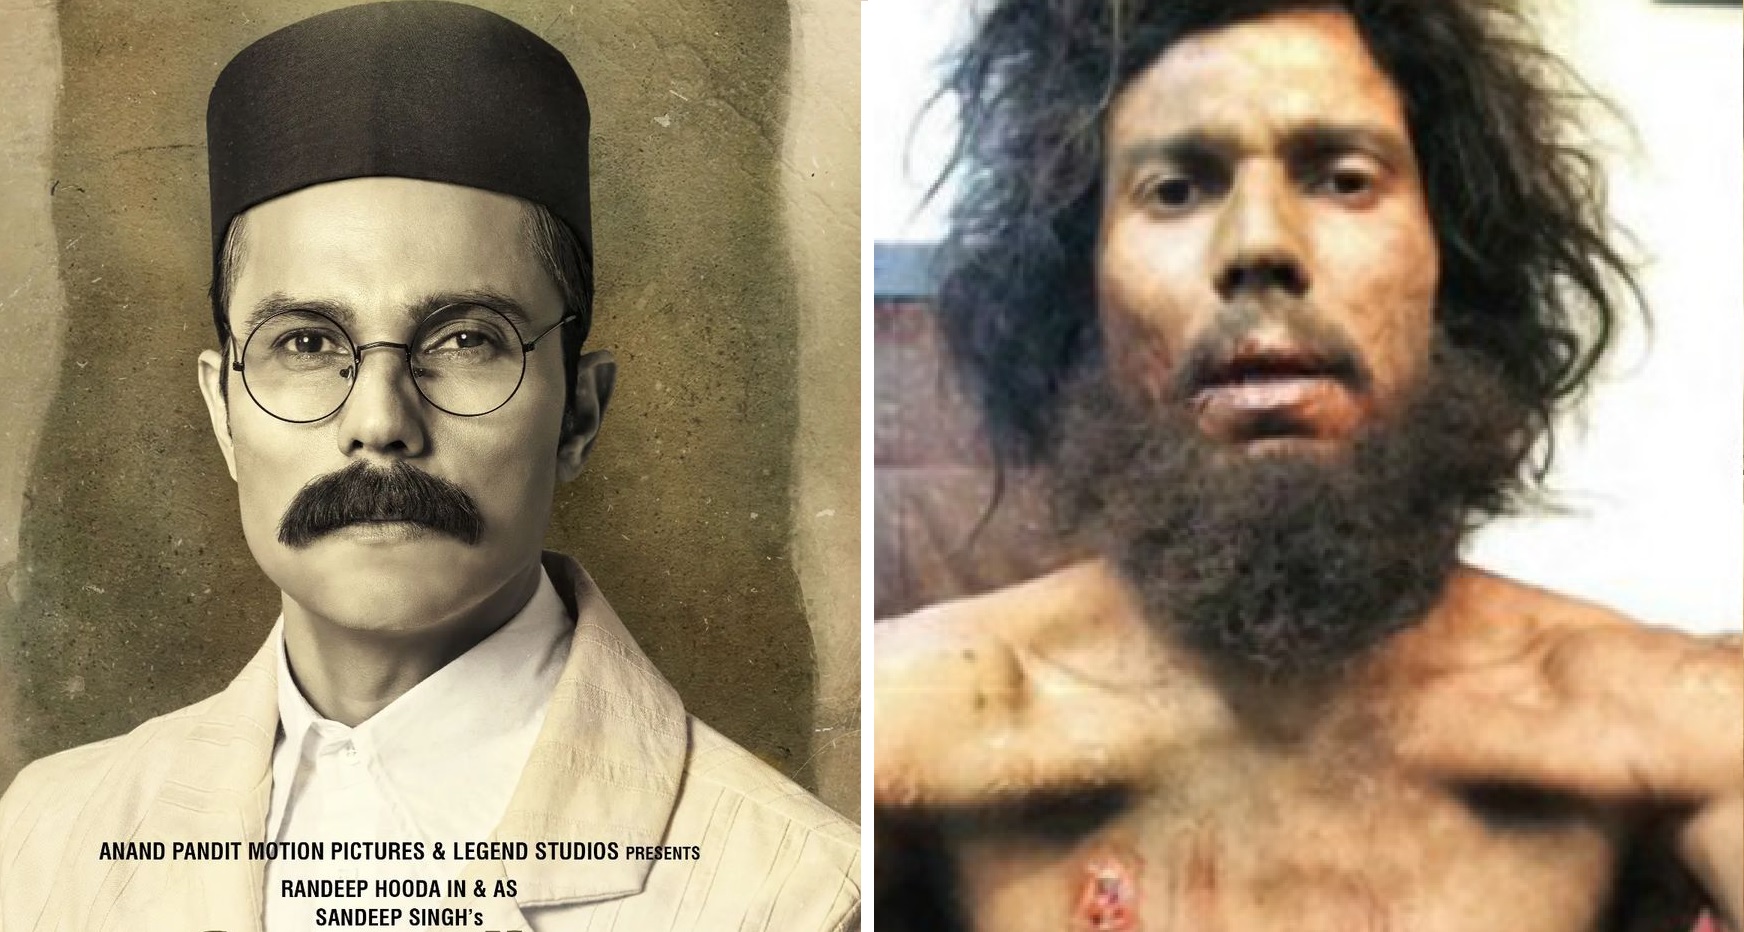 Veer Savarkar Biopic: “Randeep Hooda had only 1 khajoor and 1 glass of milk for 4 months until he lost 26 kg to play the title role”